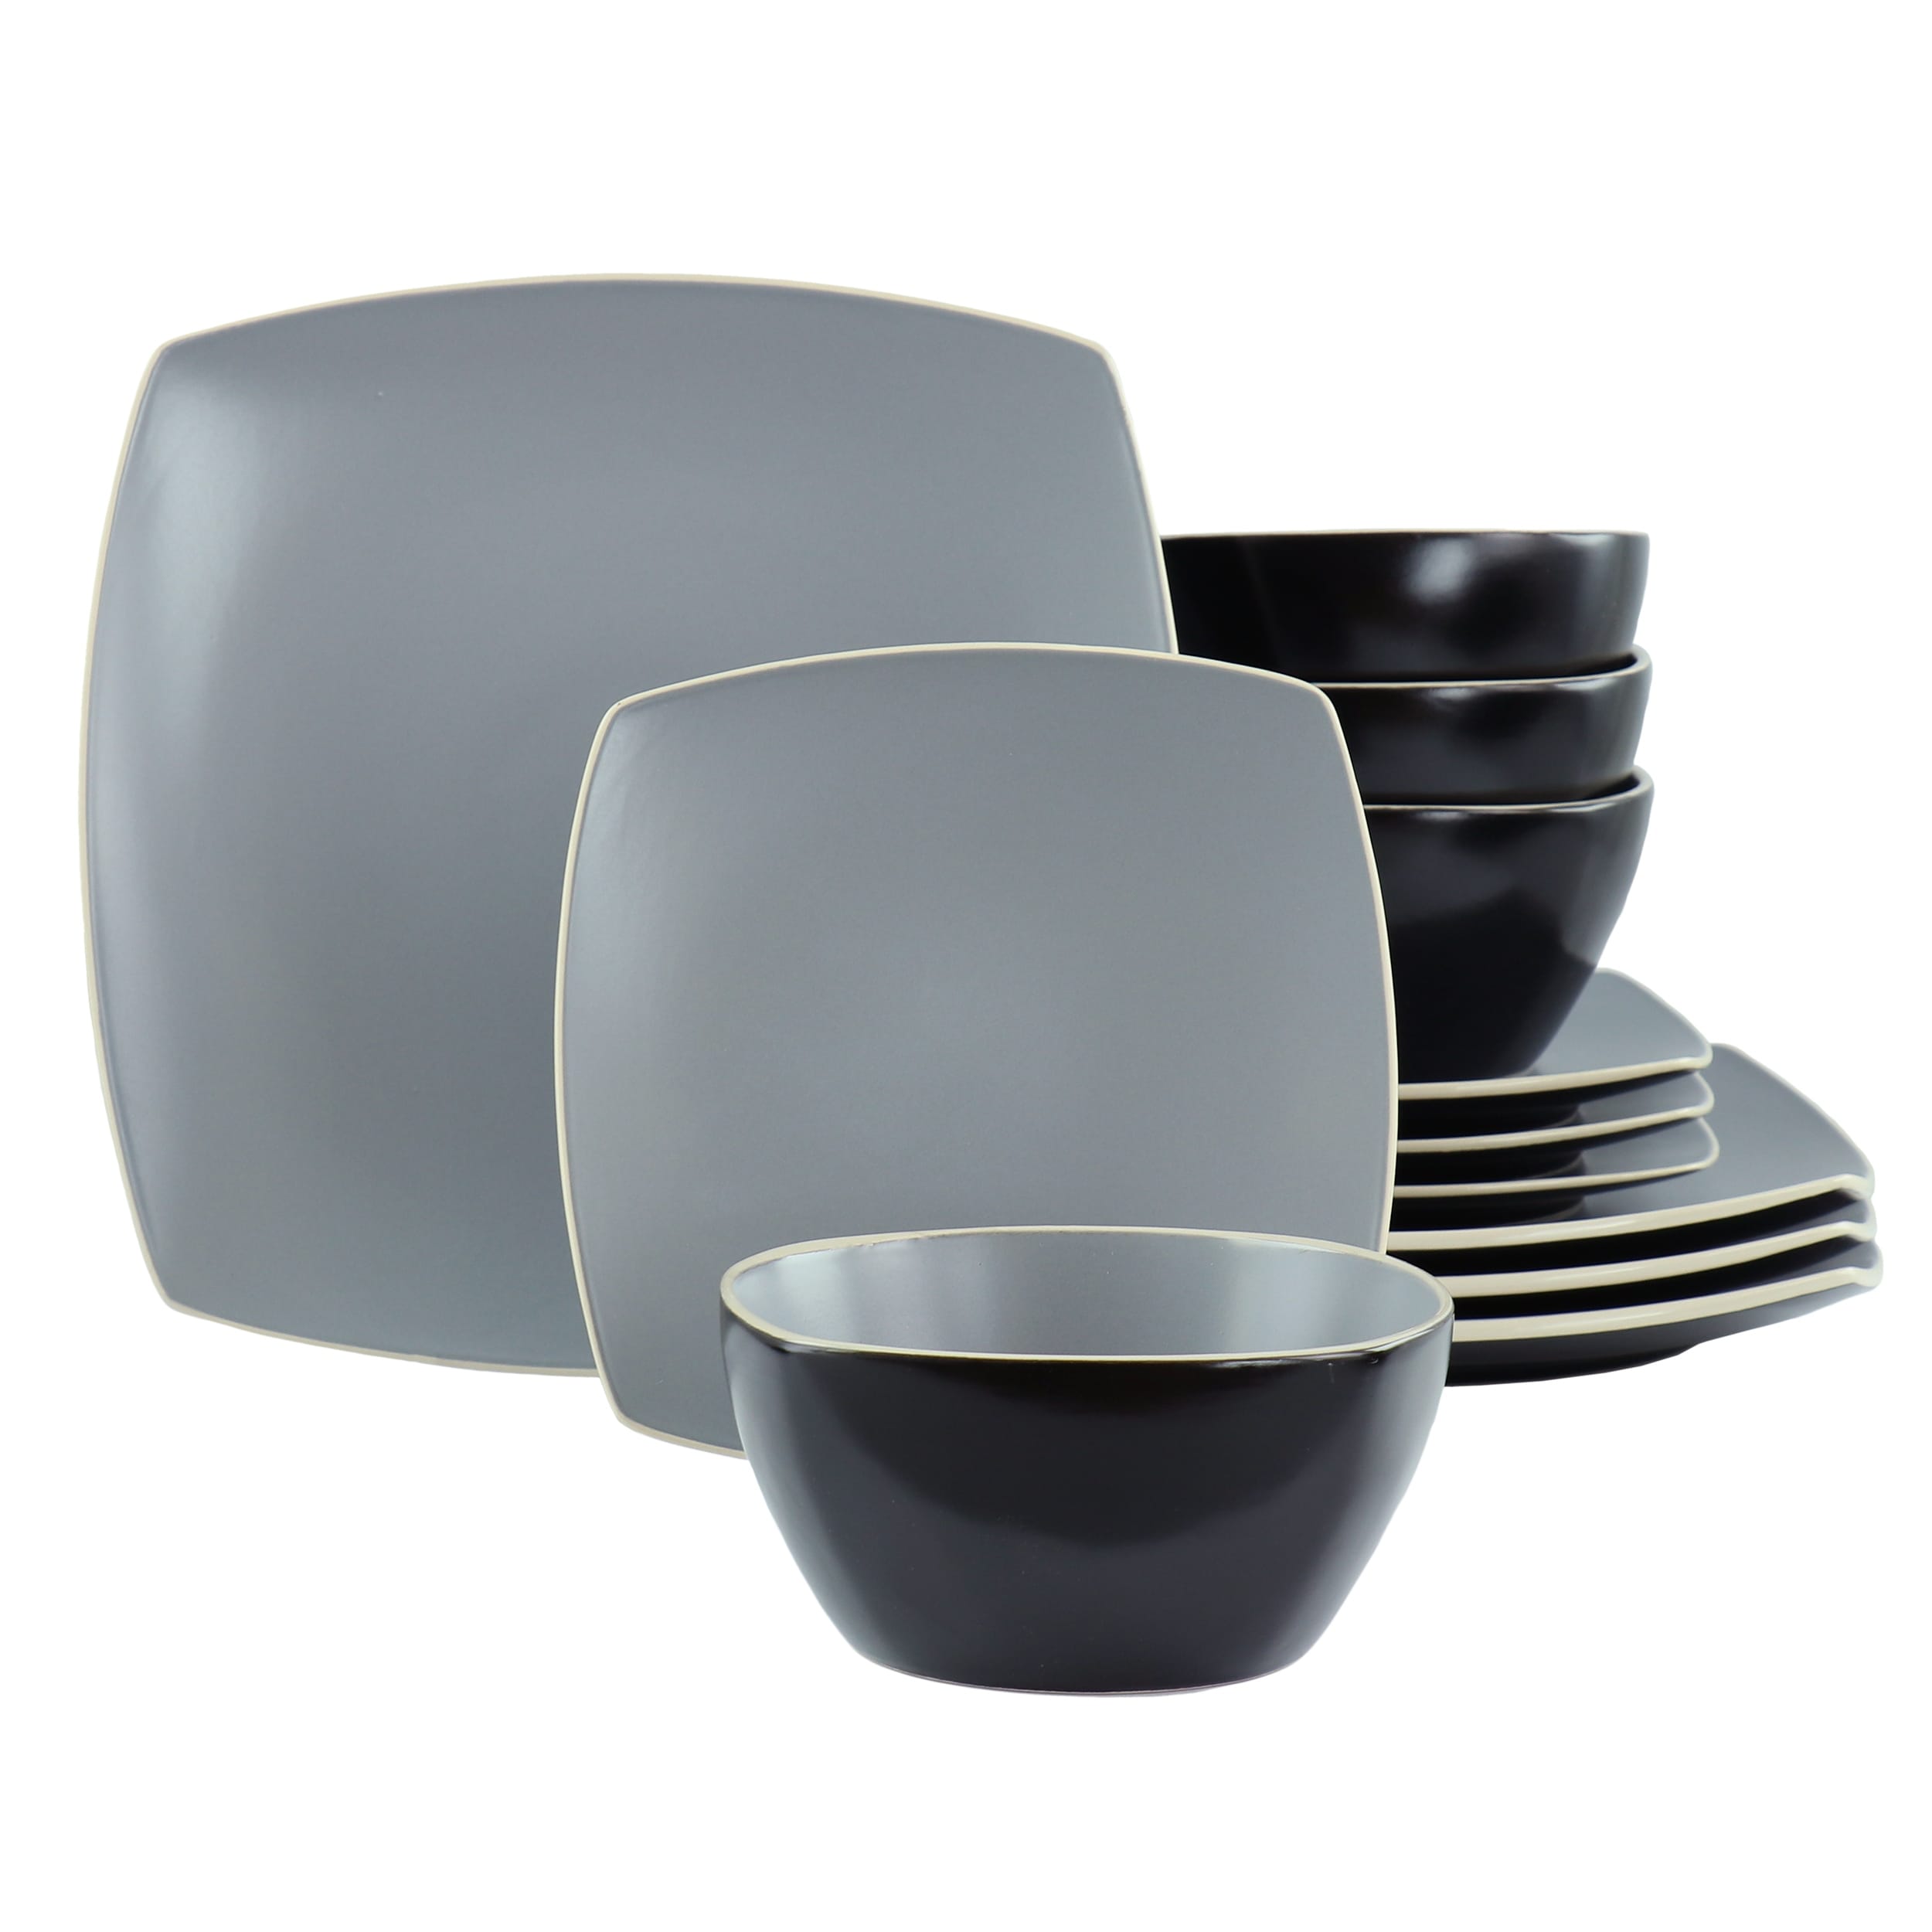 https://ak1.ostkcdn.com/images/products/is/images/direct/6bc6d7d0d04ad8a5d4f8cf80da2d1be40dc00f0e/12-Piece-Square-Stoneware-Dinnerware-Set-in-Grey-and-Black.jpg